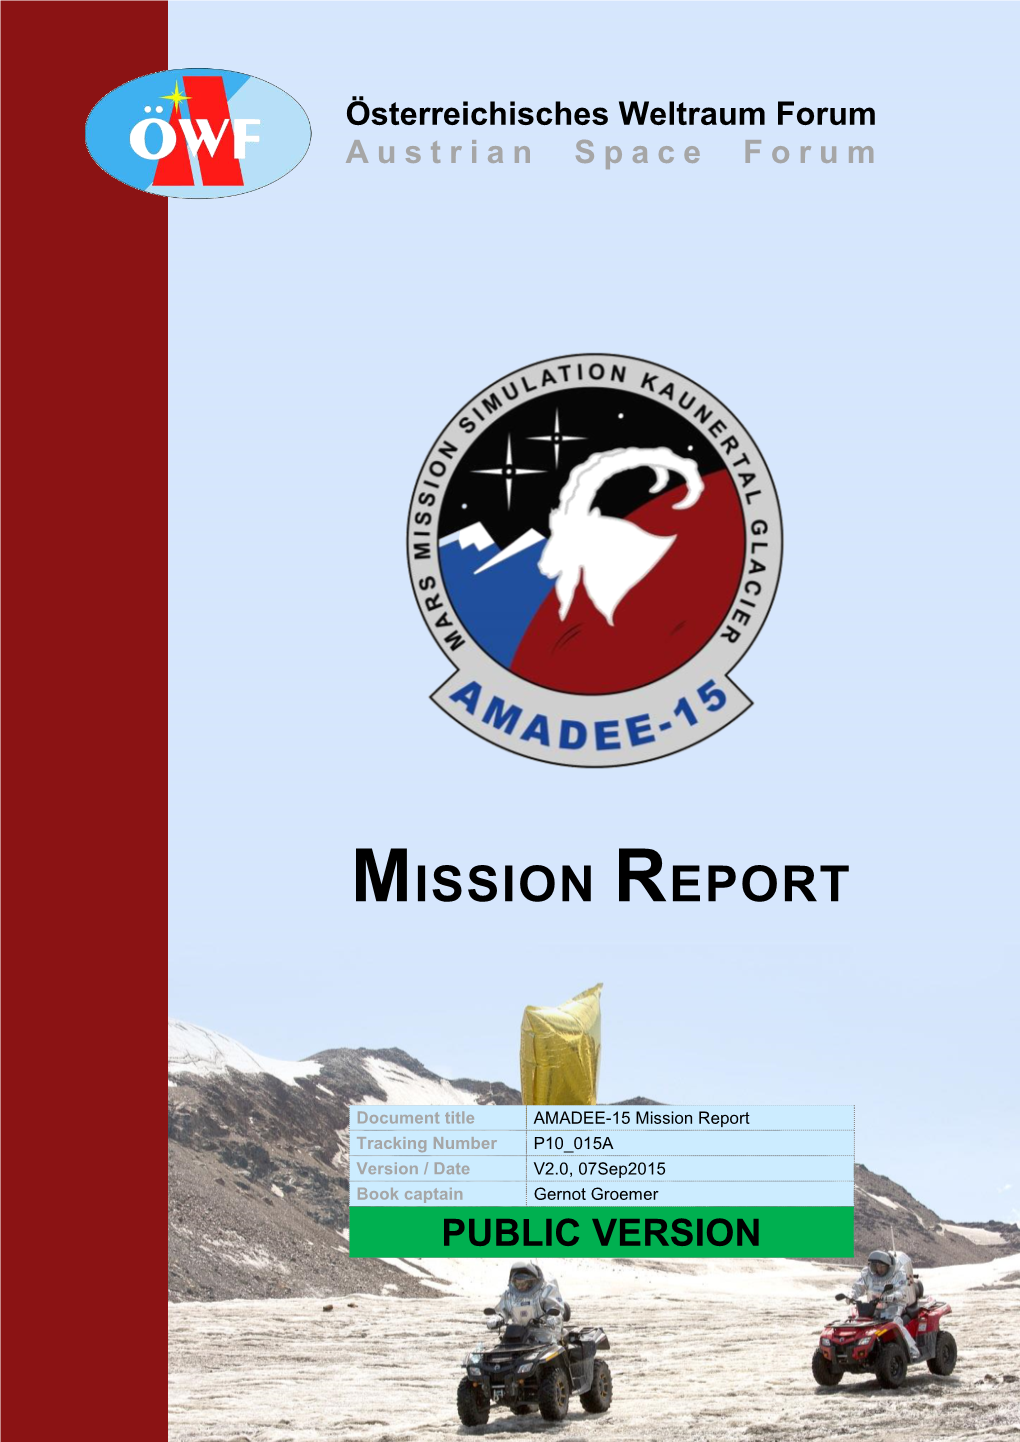 The AMADEE-15 Final Report